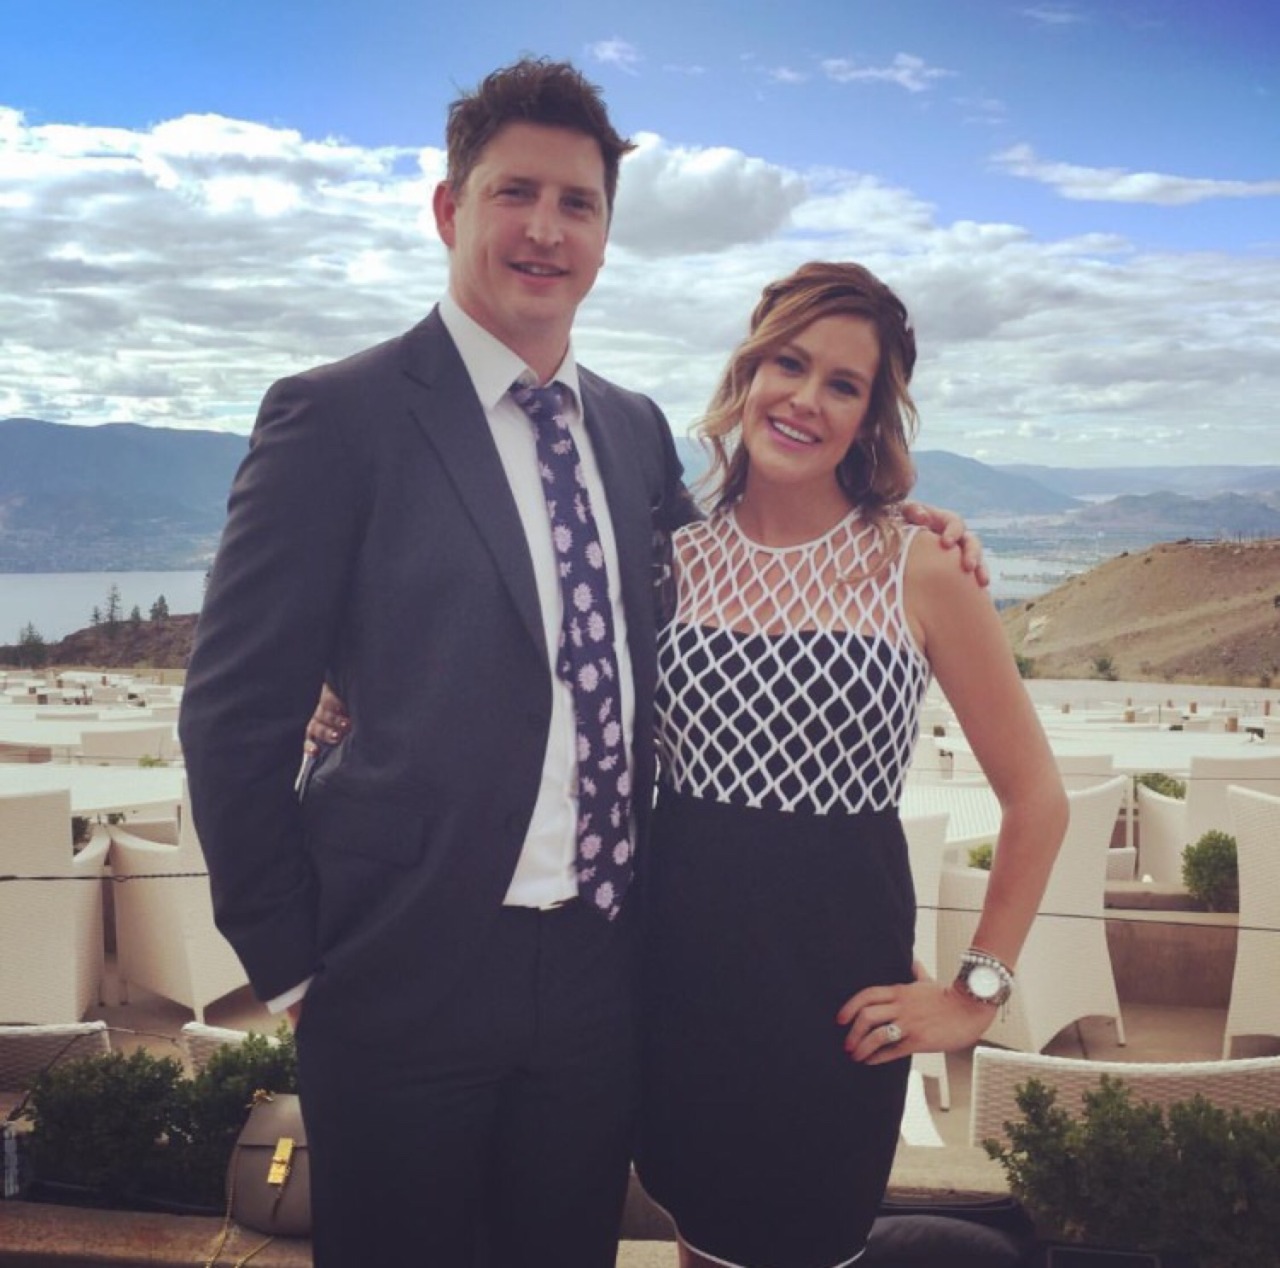 Wives and Girlfriends of NHL players — Alannah Mozes & Zach Hyman